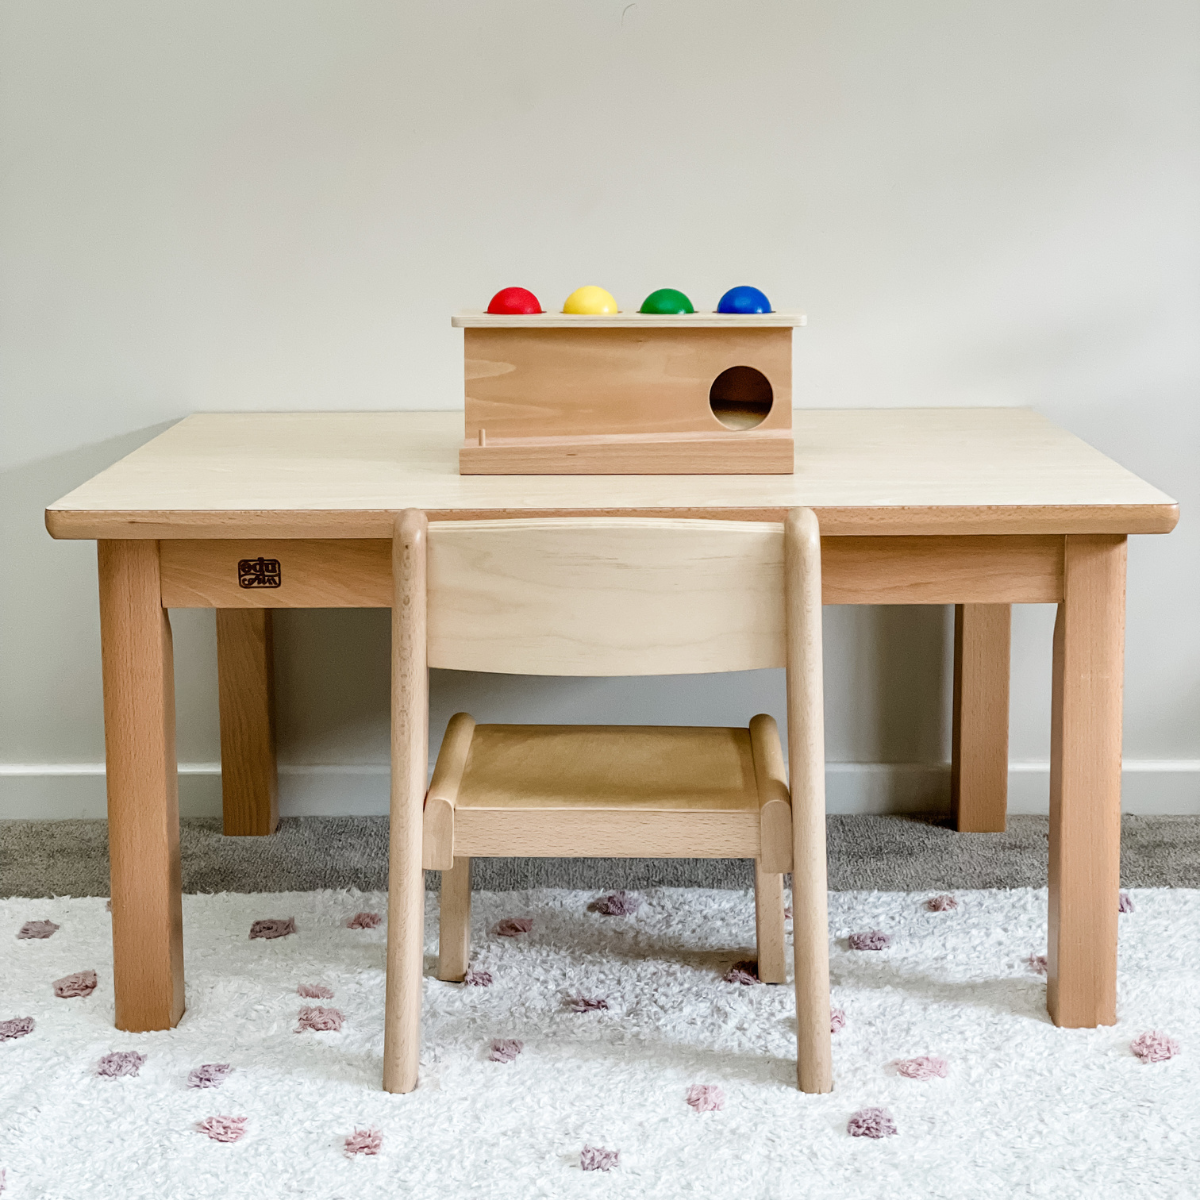 Kid's Furniture - All Tables and Chairs - My Playroom 